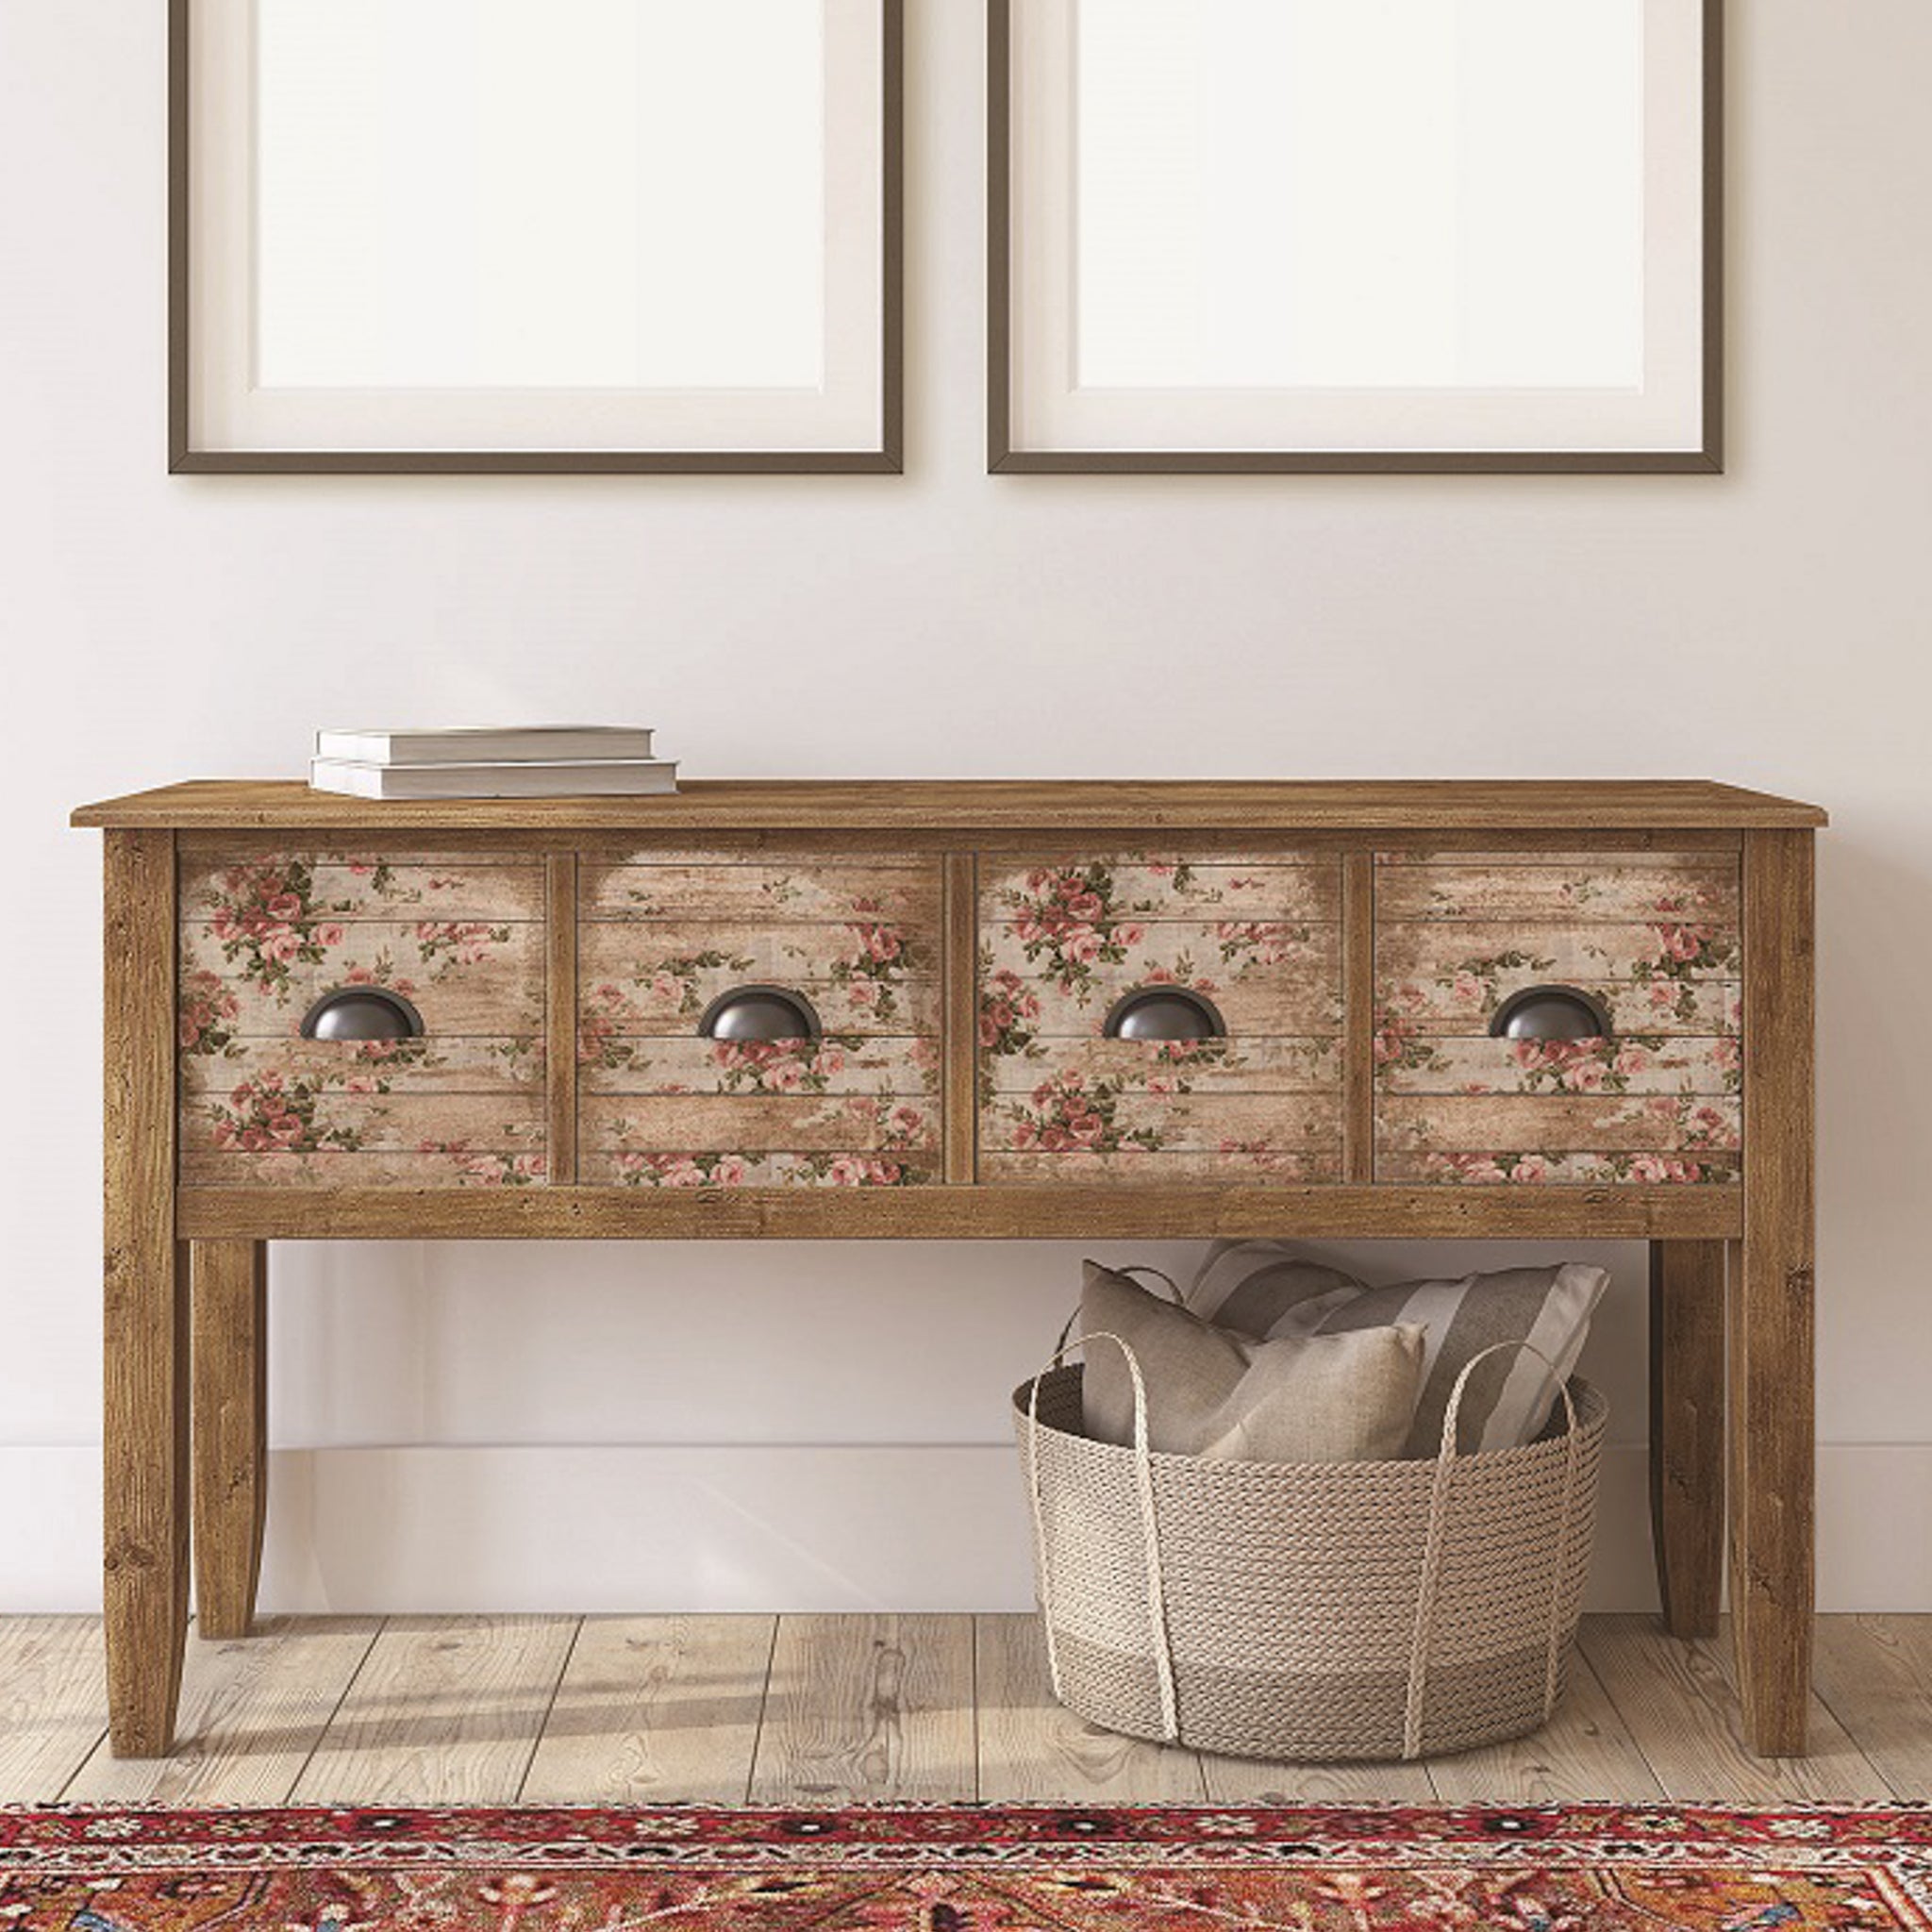 A natural wood console table has 4 drawers in a row and each drawer features ReDesign with Prima's Shabby Floral tissue paper on them.